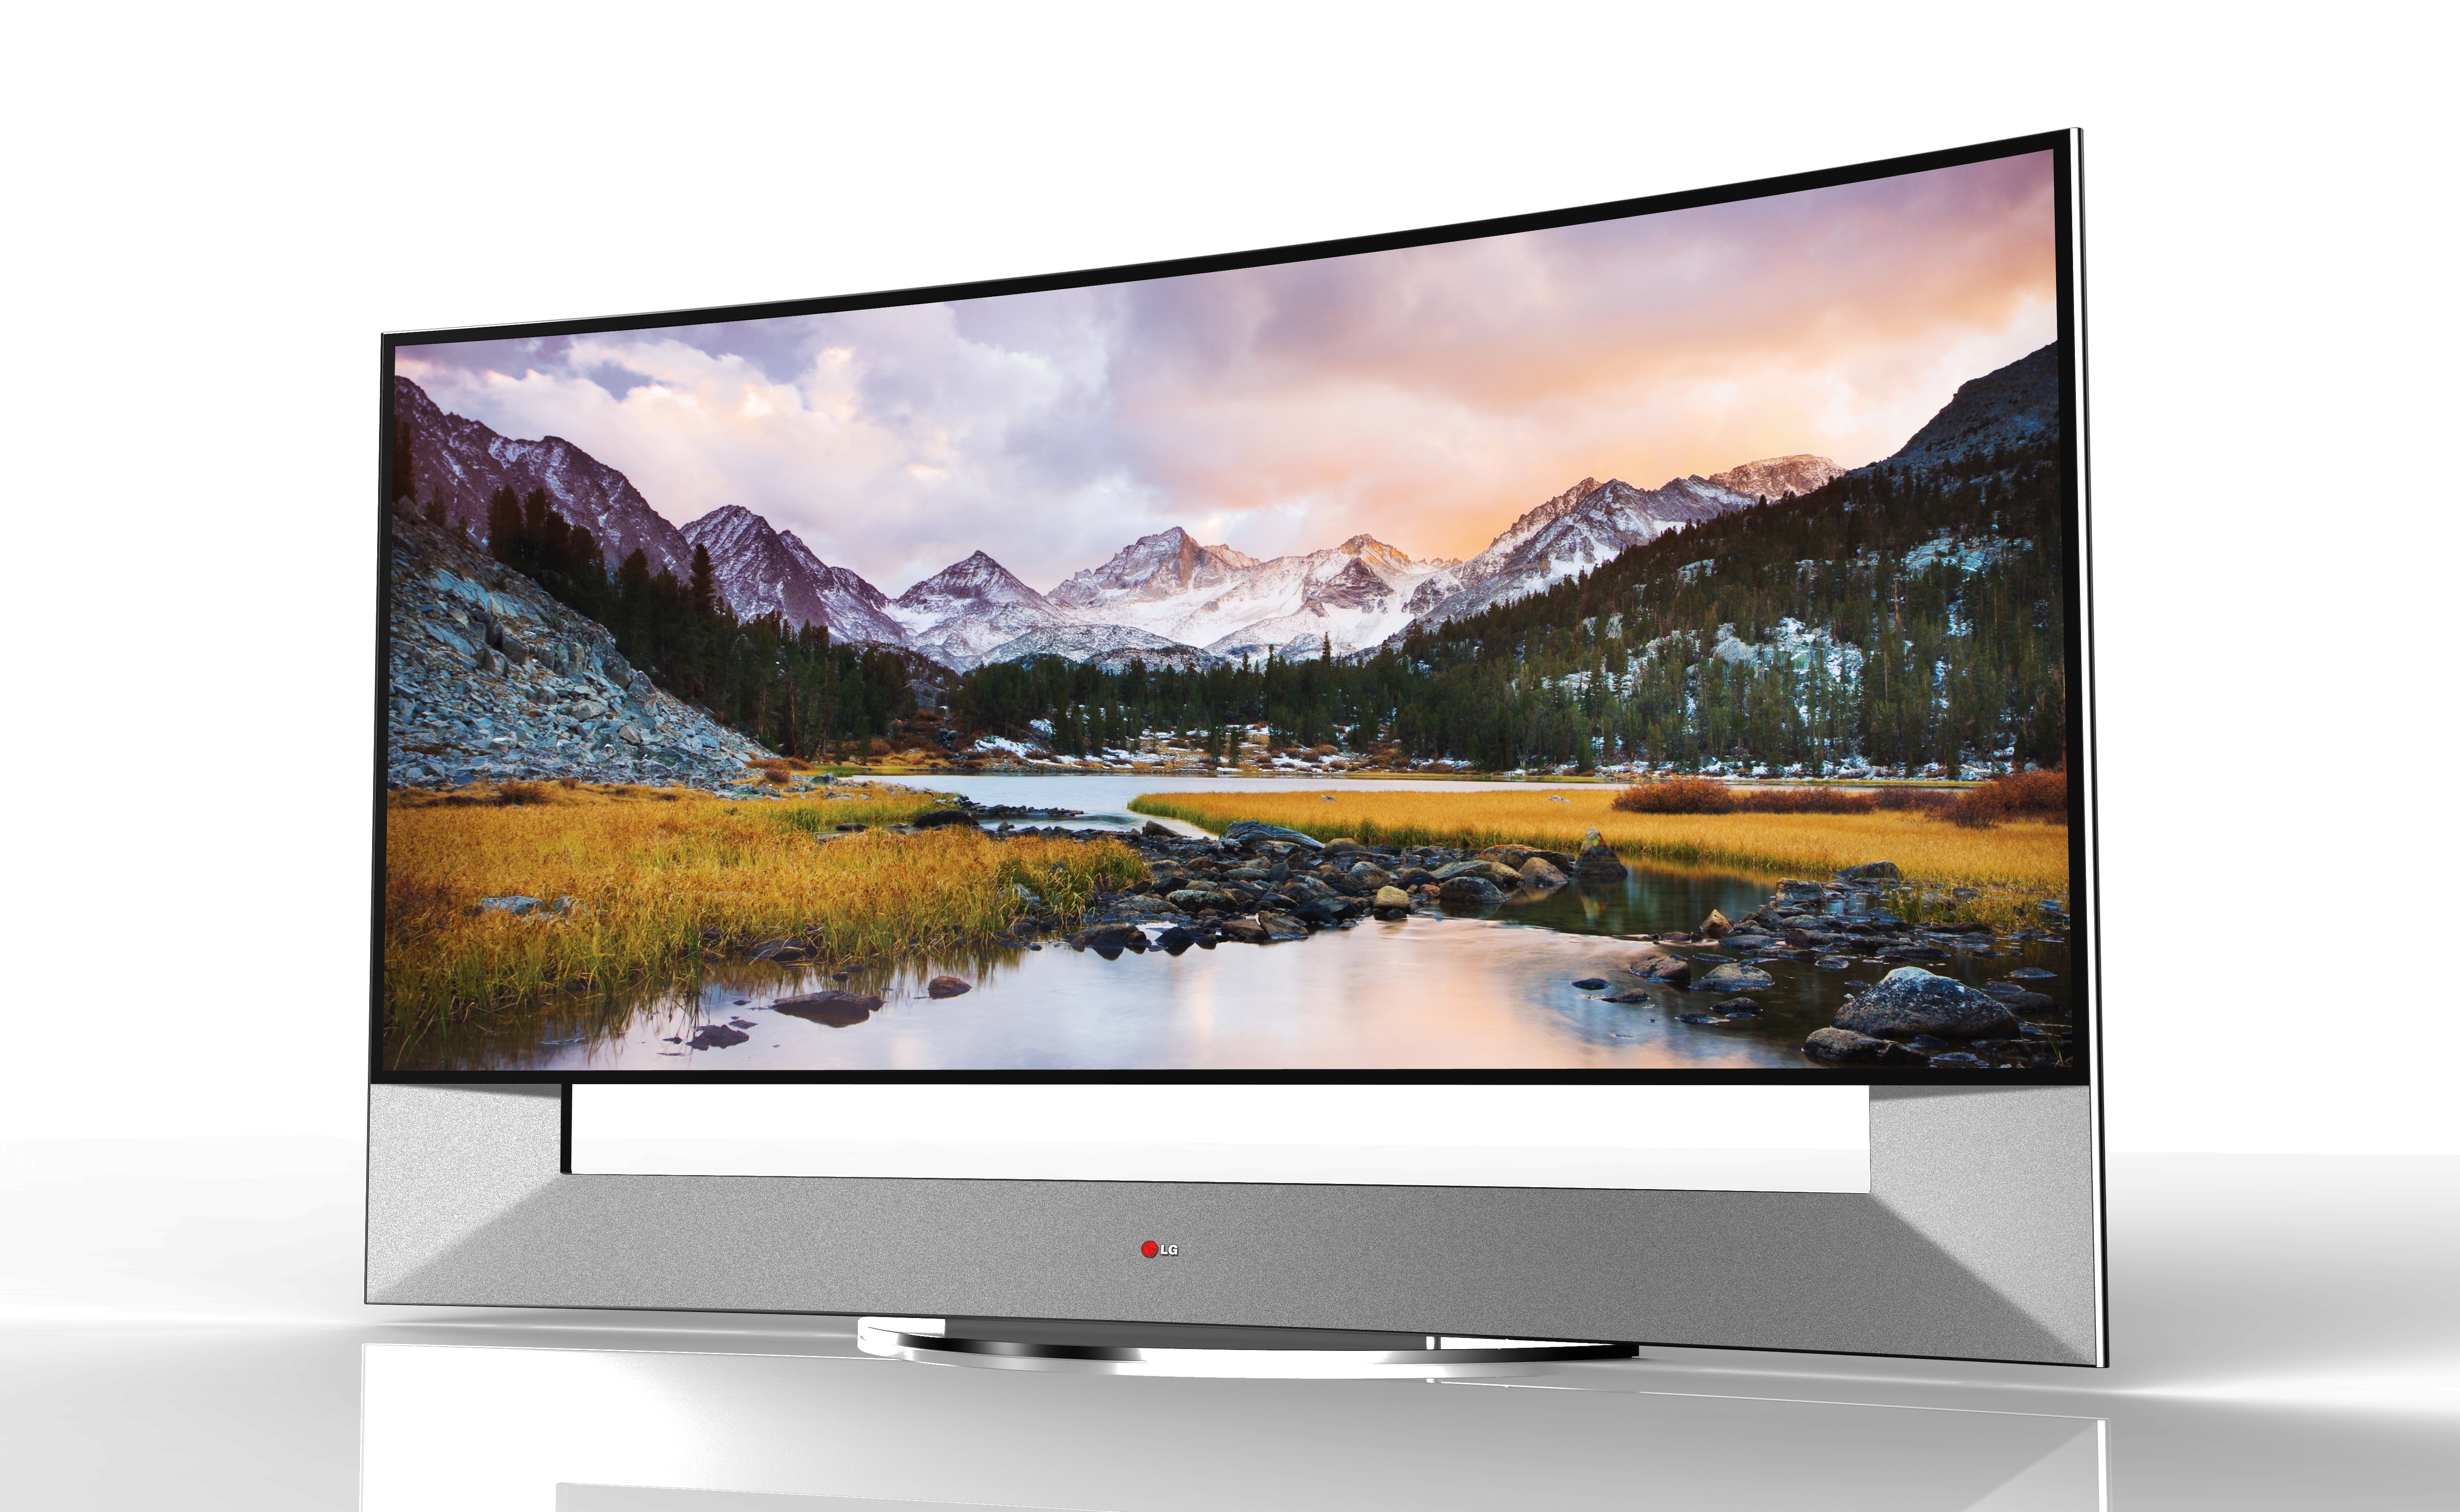 Lg To Unveil Worlds First 105 Inch Curved 4k Ultra Hd Tv At Ces 2014